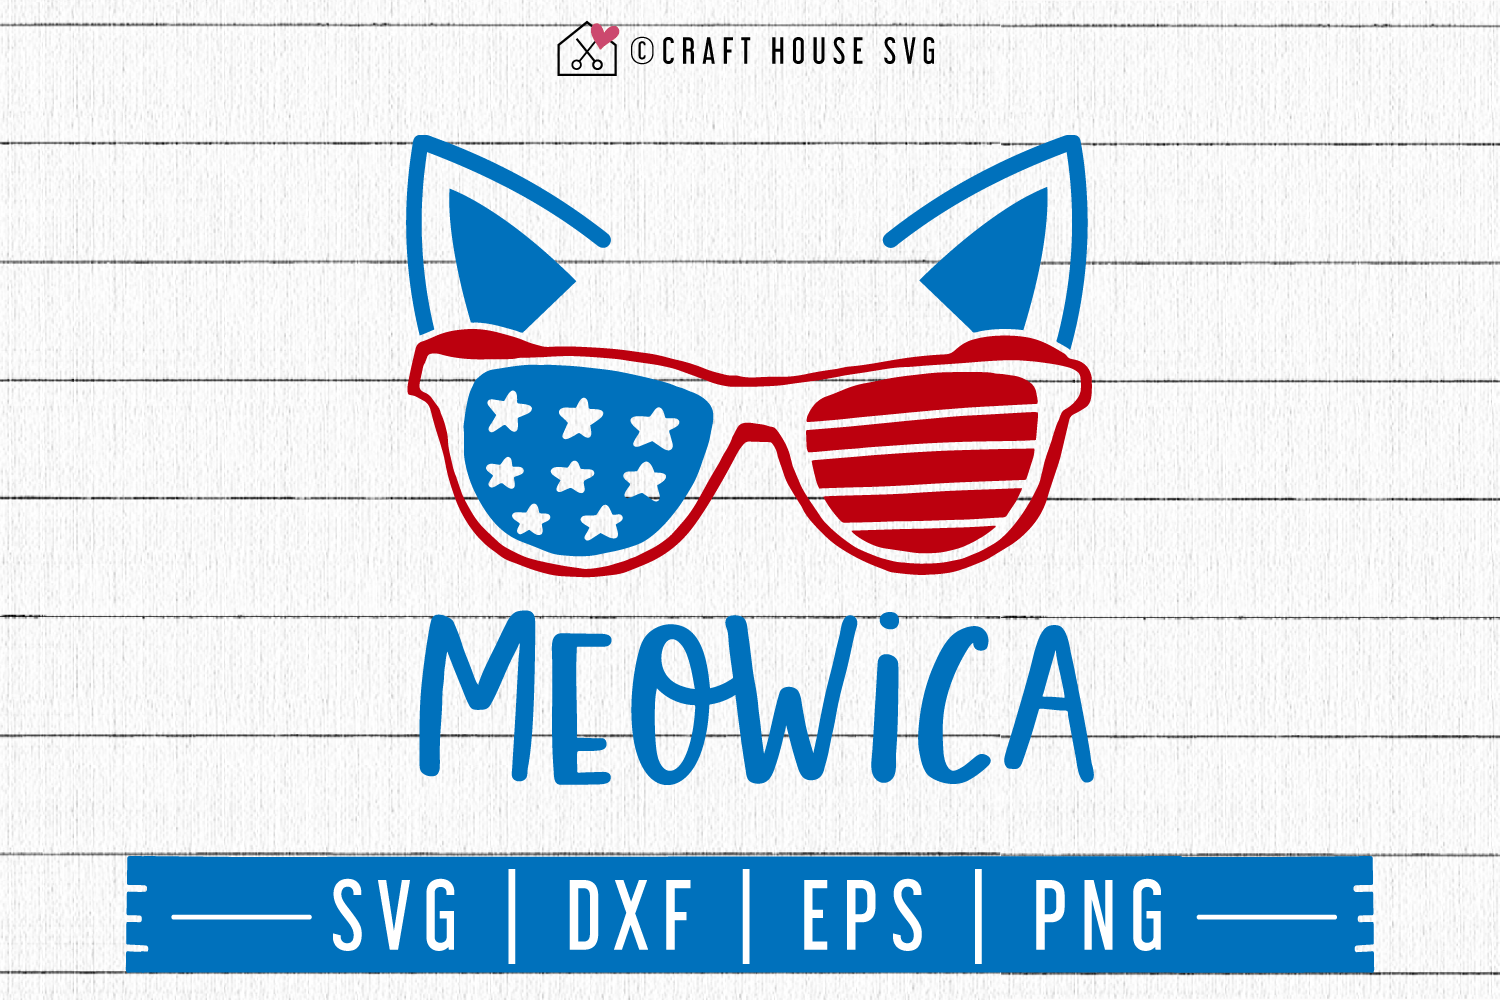 4th of July SVG file | Meowica SVG Craft House SVG - SVG files for Cricut and Silhouette